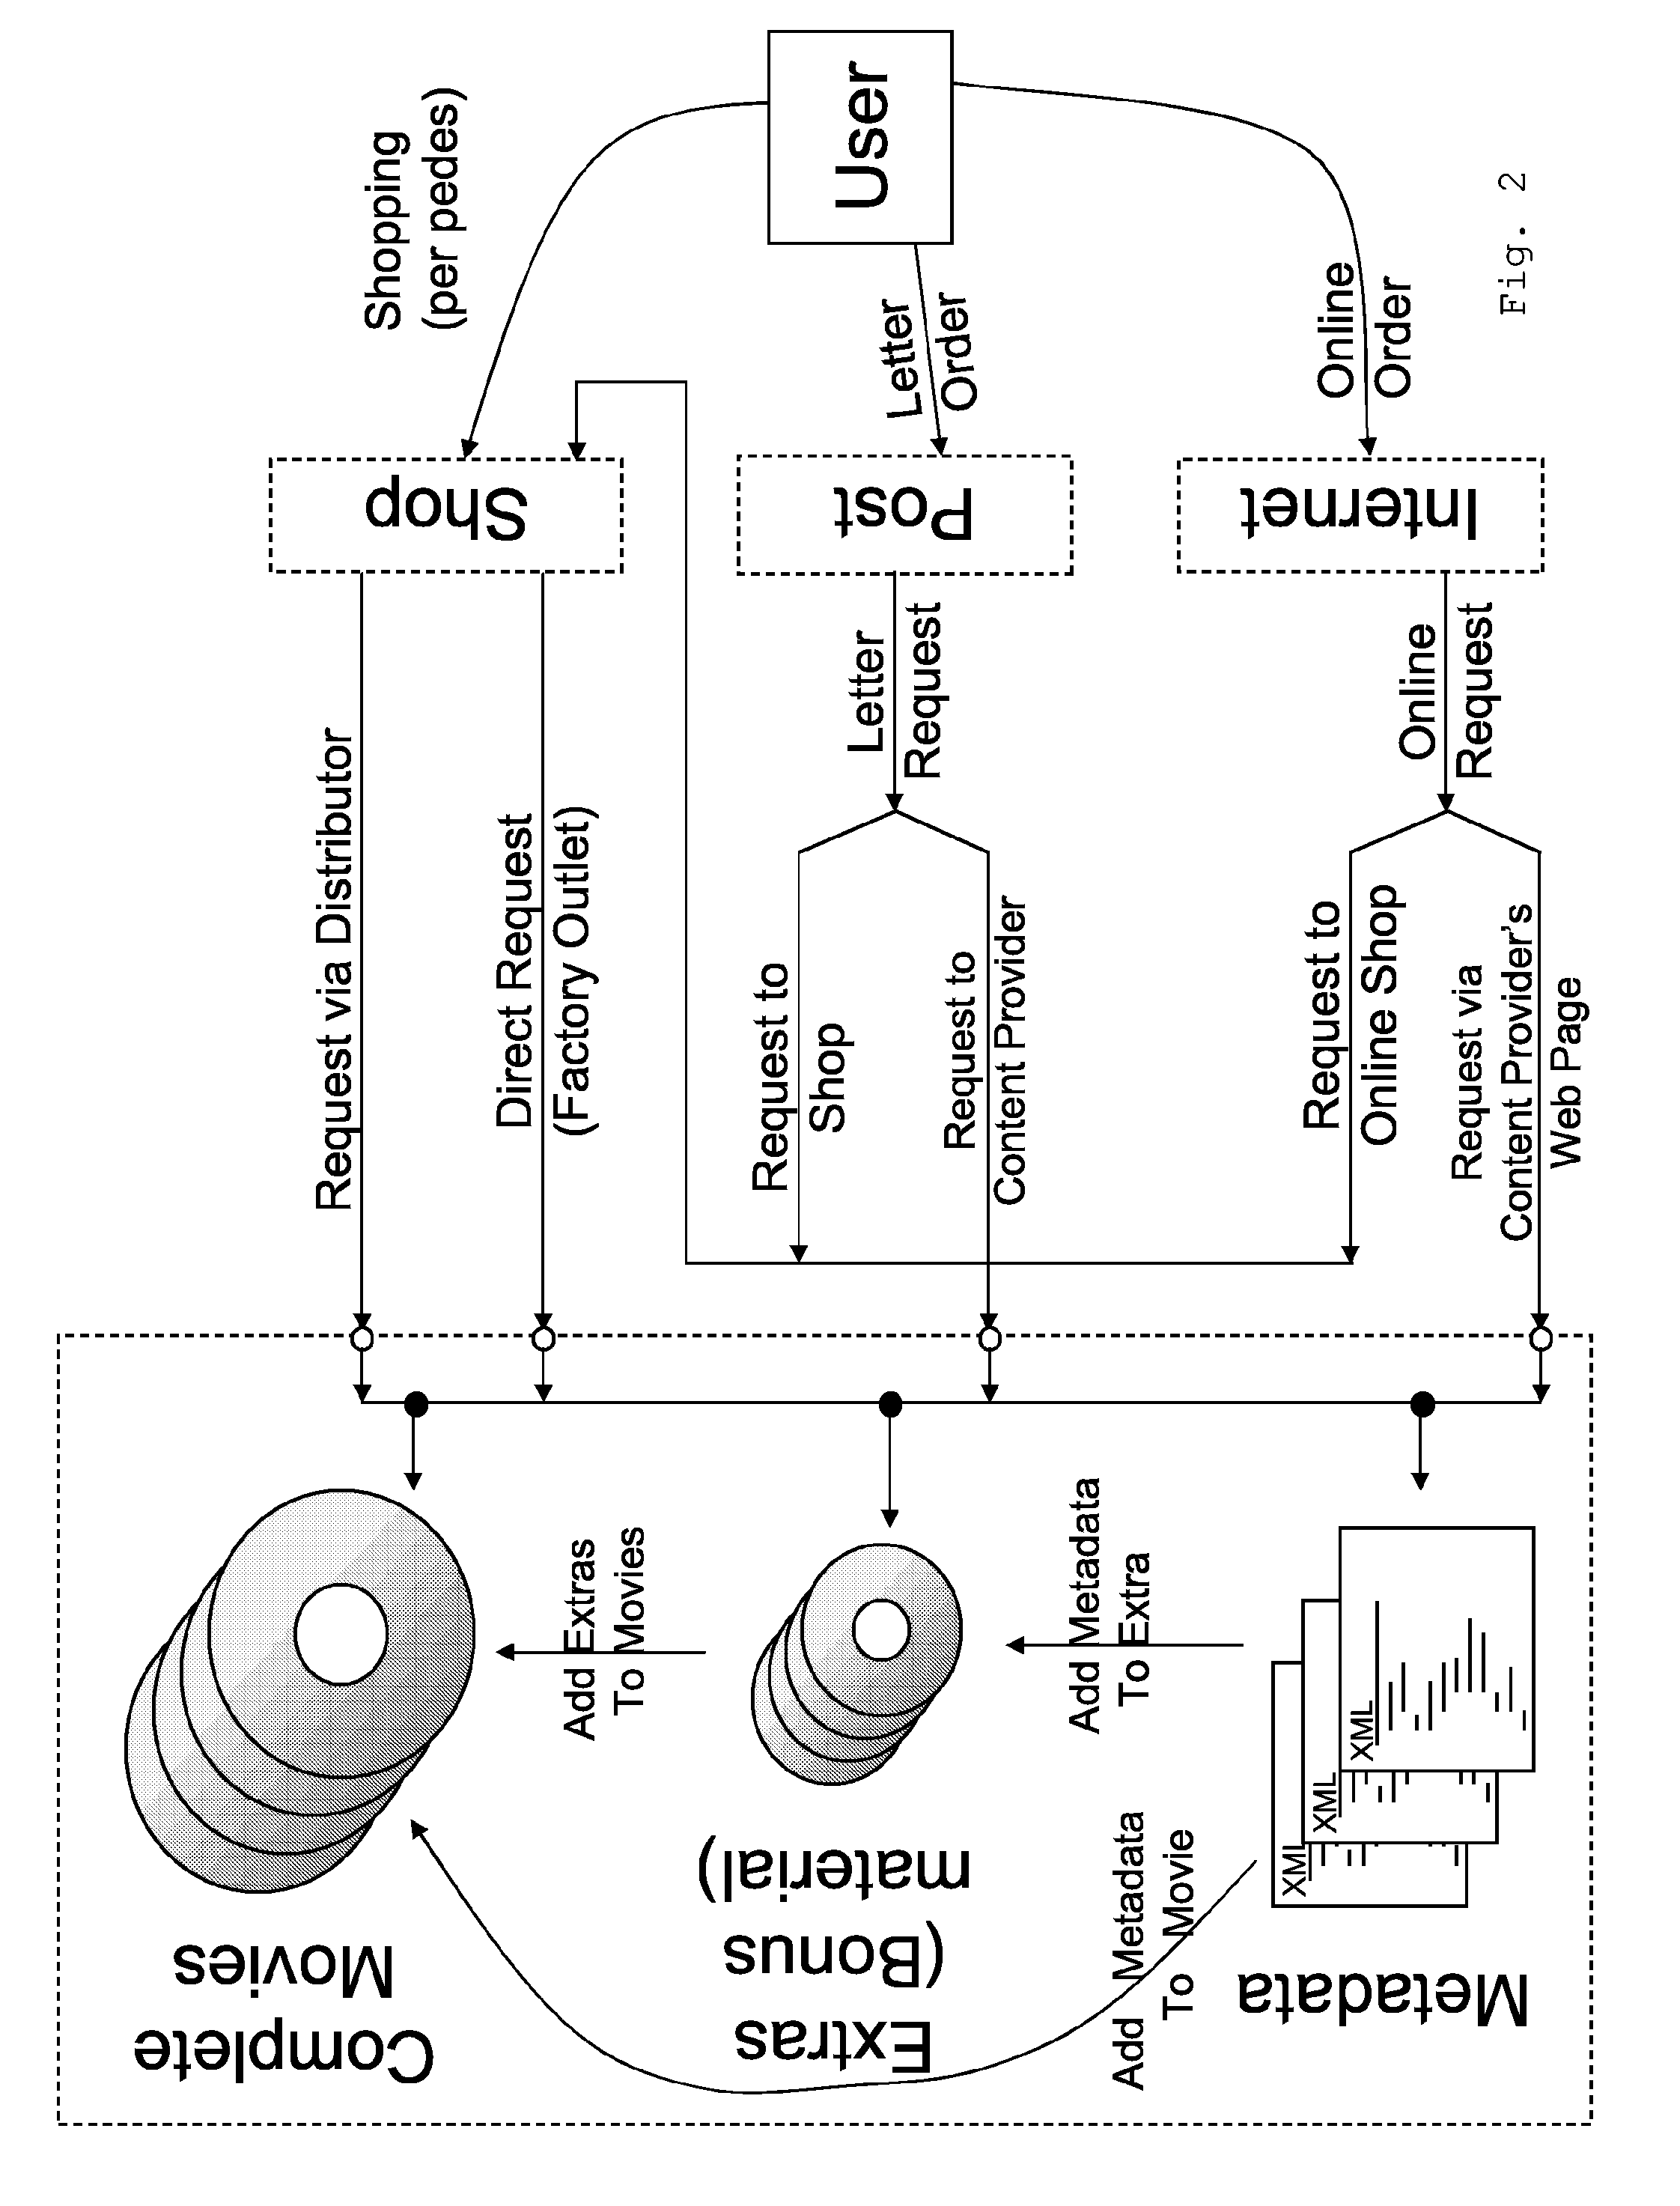 Method and Device for Handling Multiple Video Streams Using Metadata